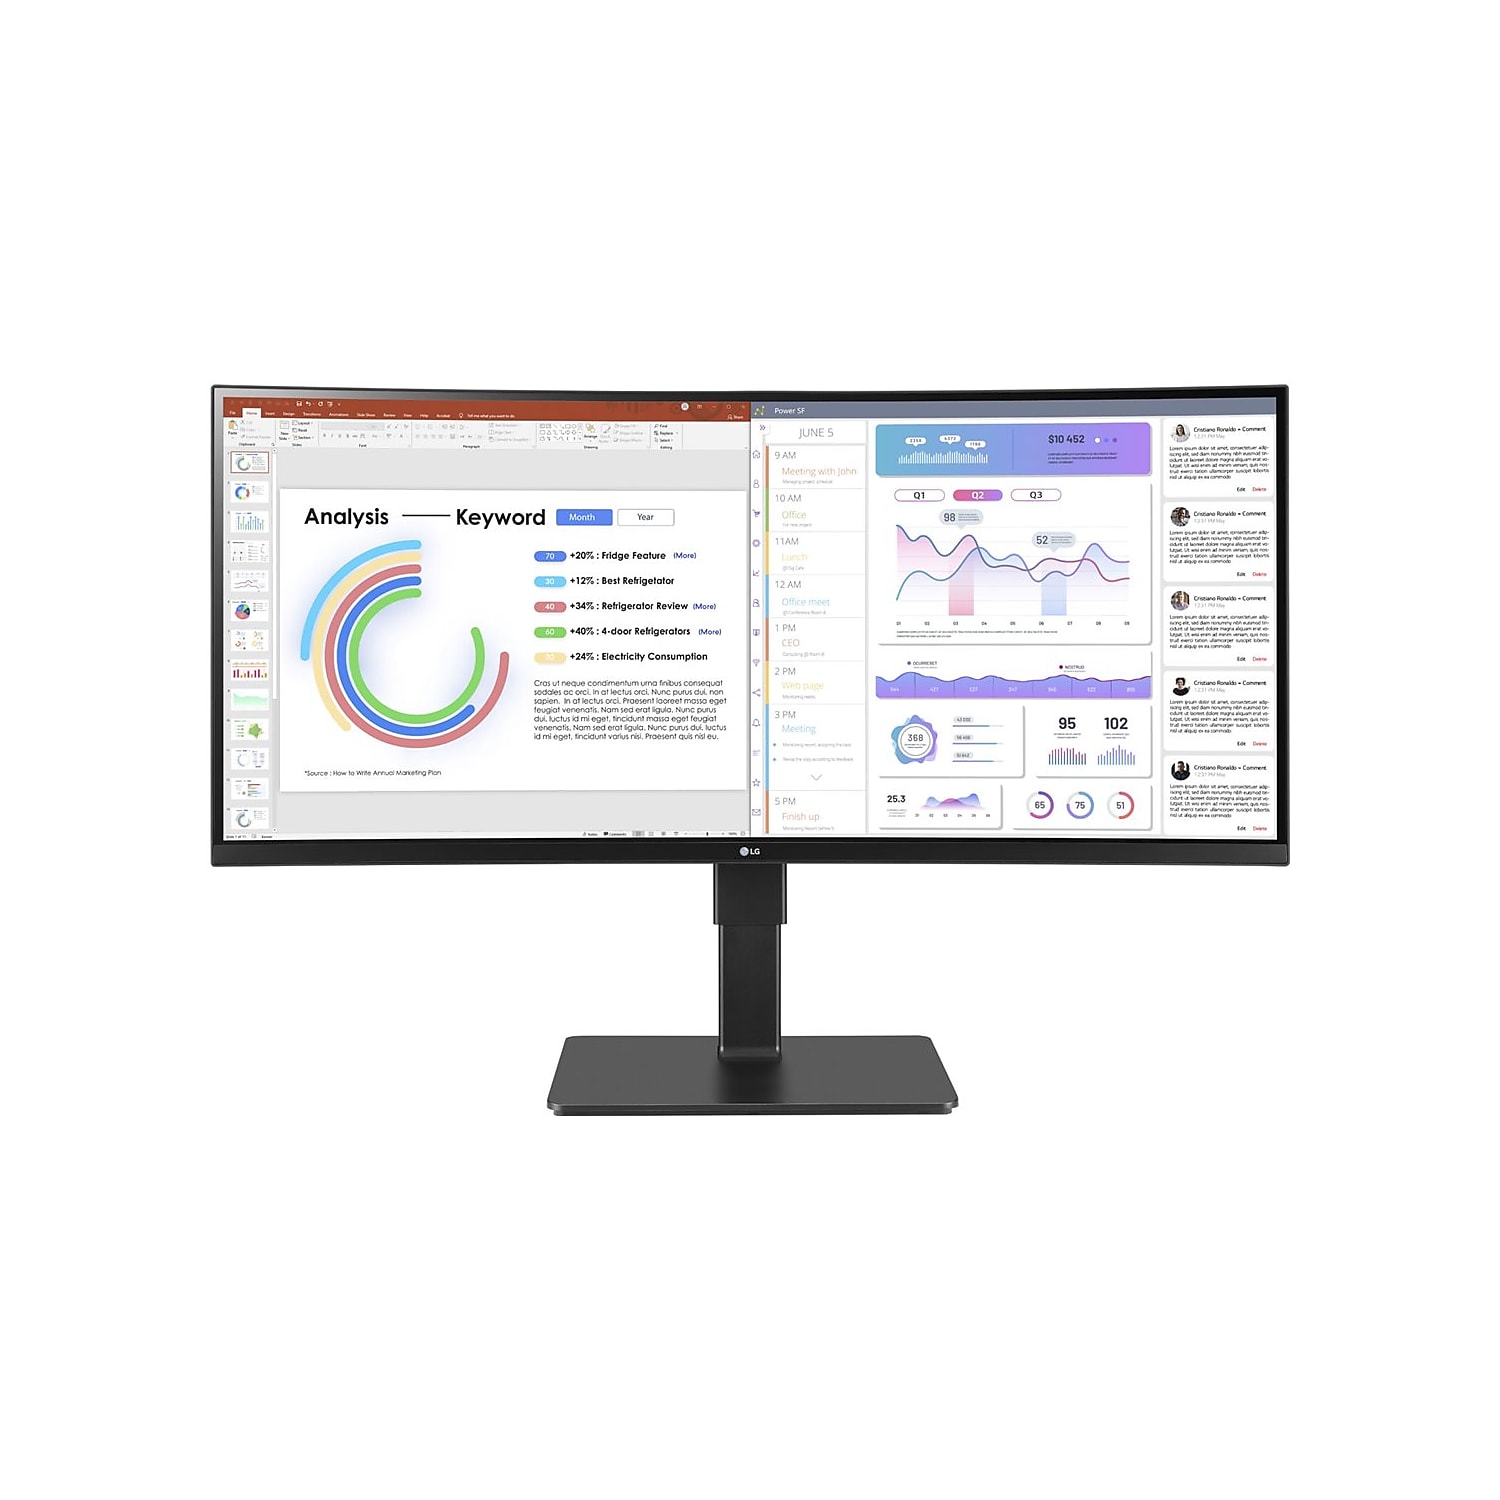 34" LG UltraWide WQHD Curved IPS Monitor w/ Built-in Universal Docking Station $249.99 at Staples, YMMV